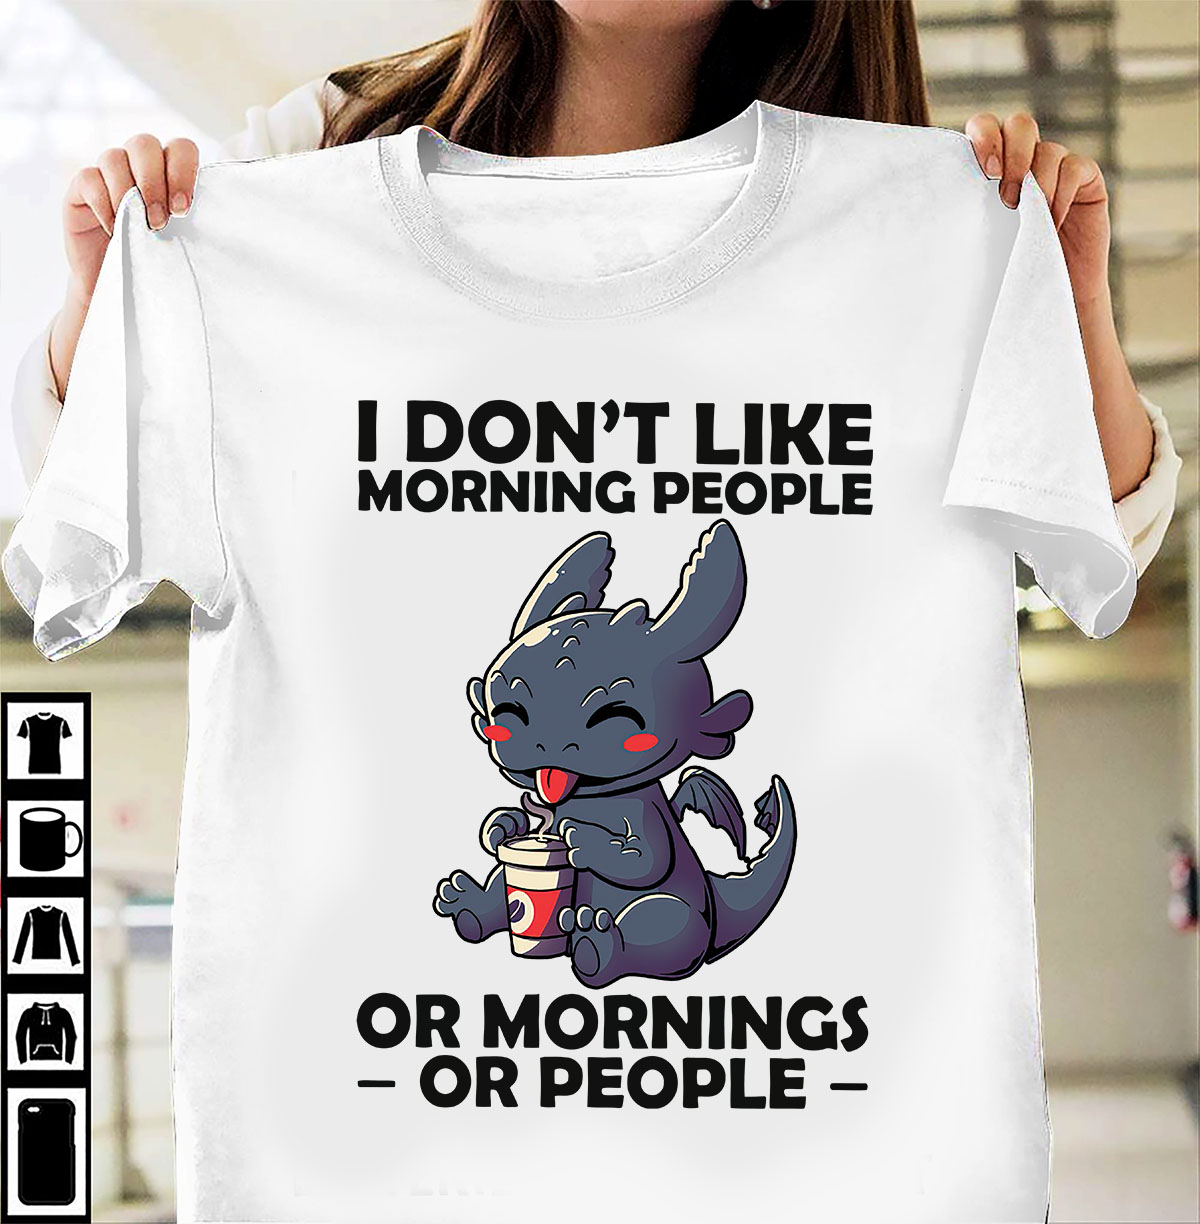 I don't like morning people or mornings or people - Dragon and coffee